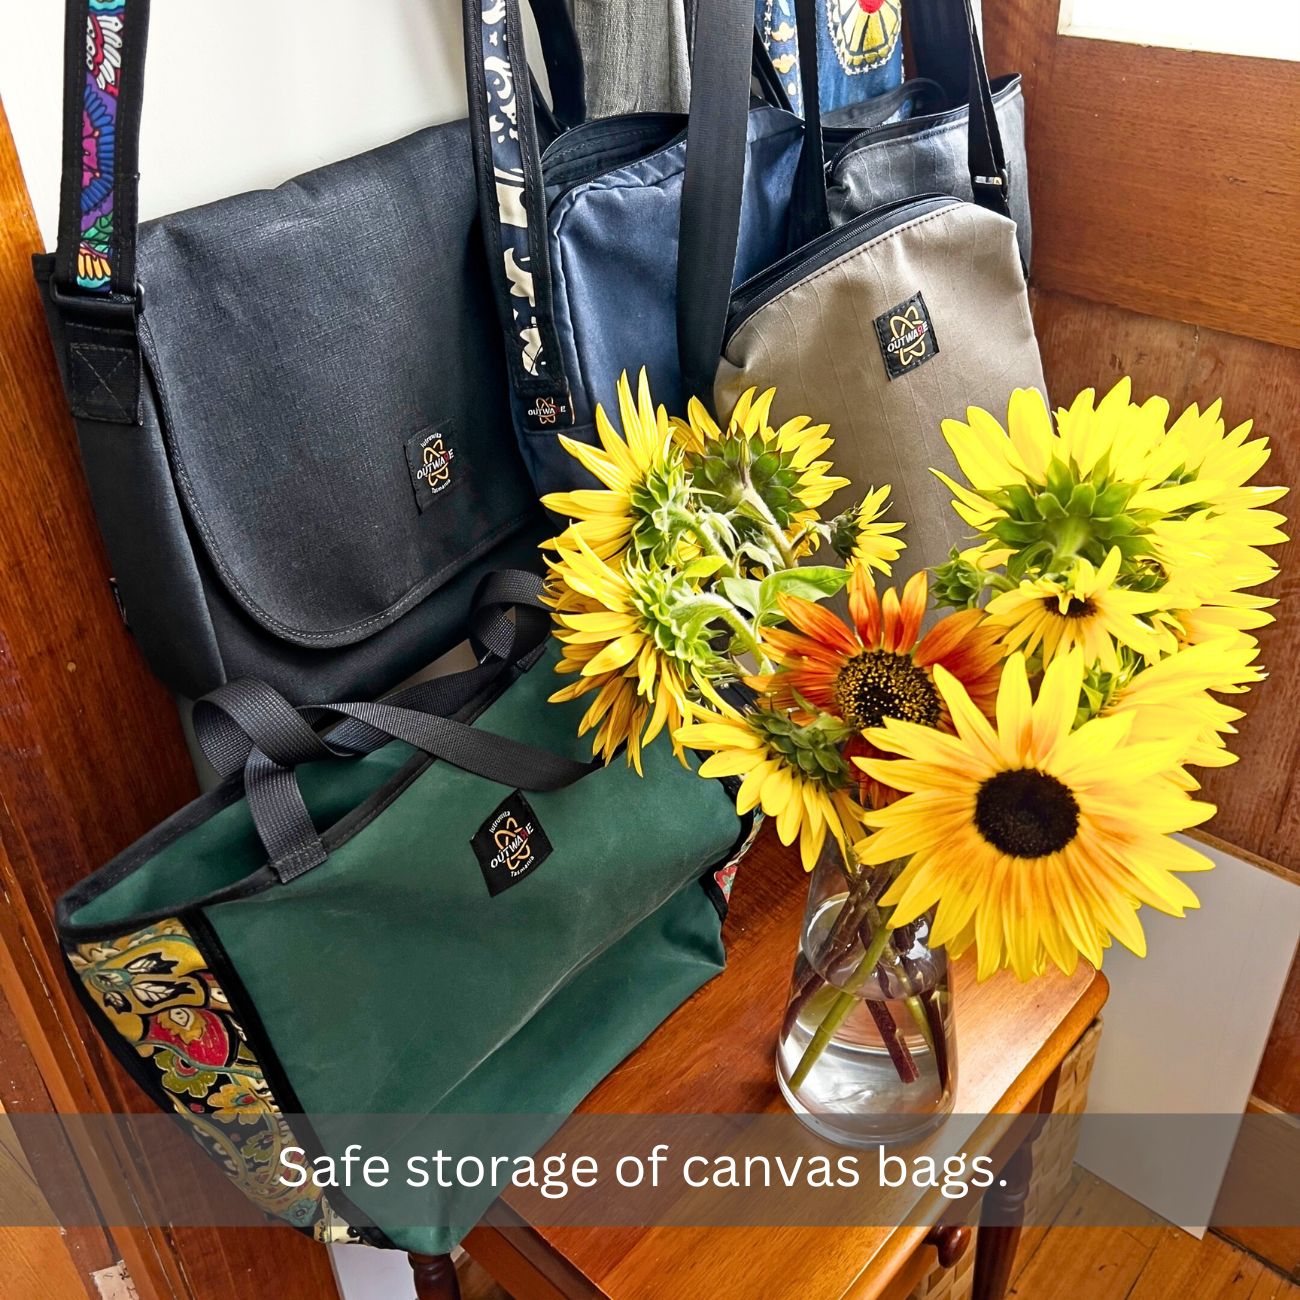 safe storage of canvas bags